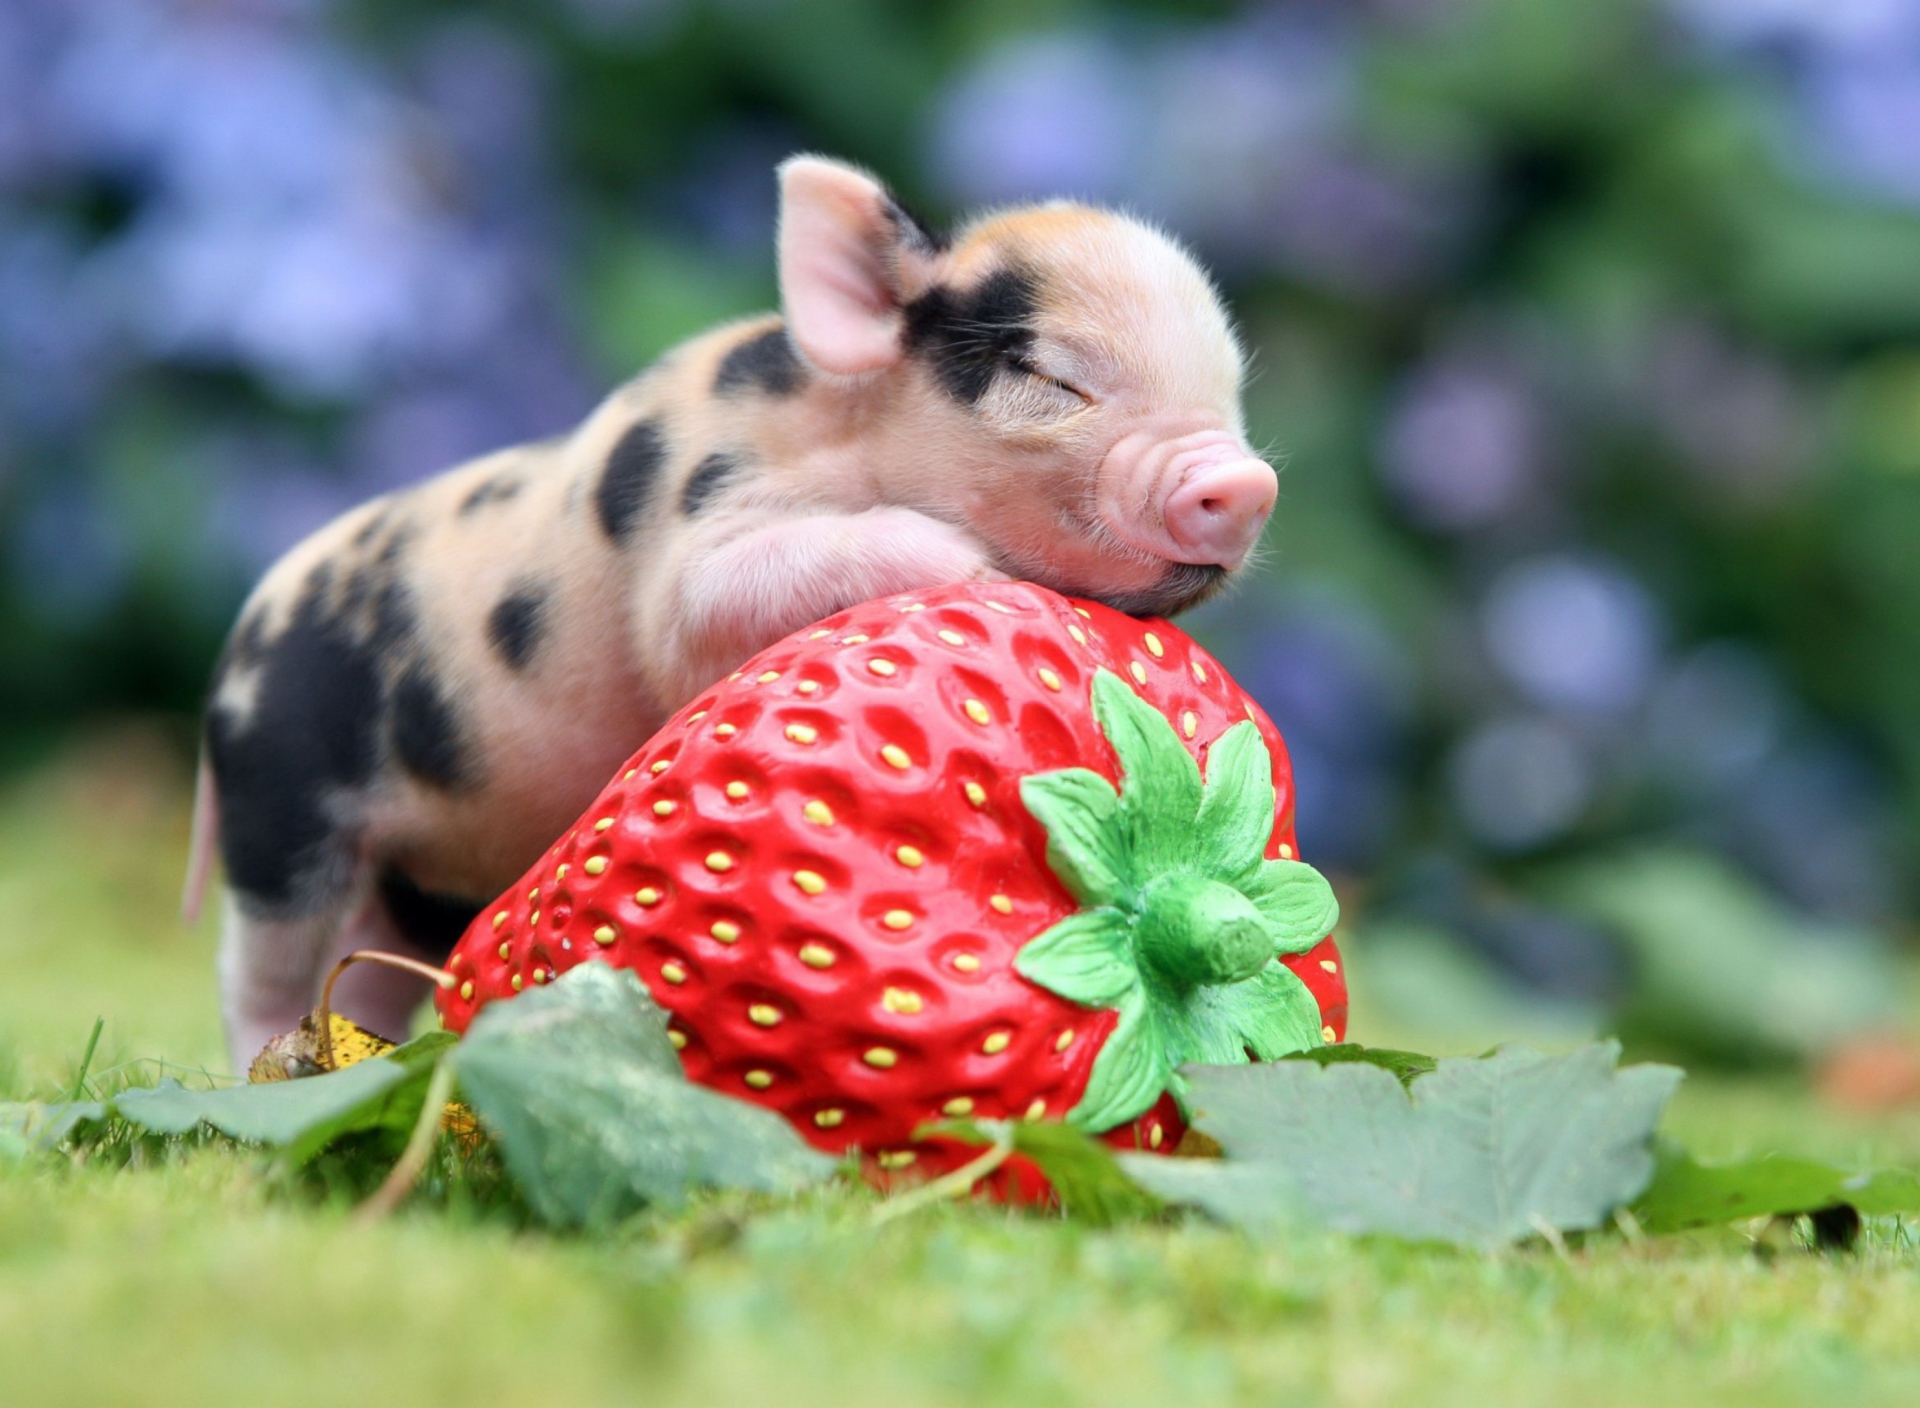 Cute Little Piglet And Strawberry wallpaper 1920x1408